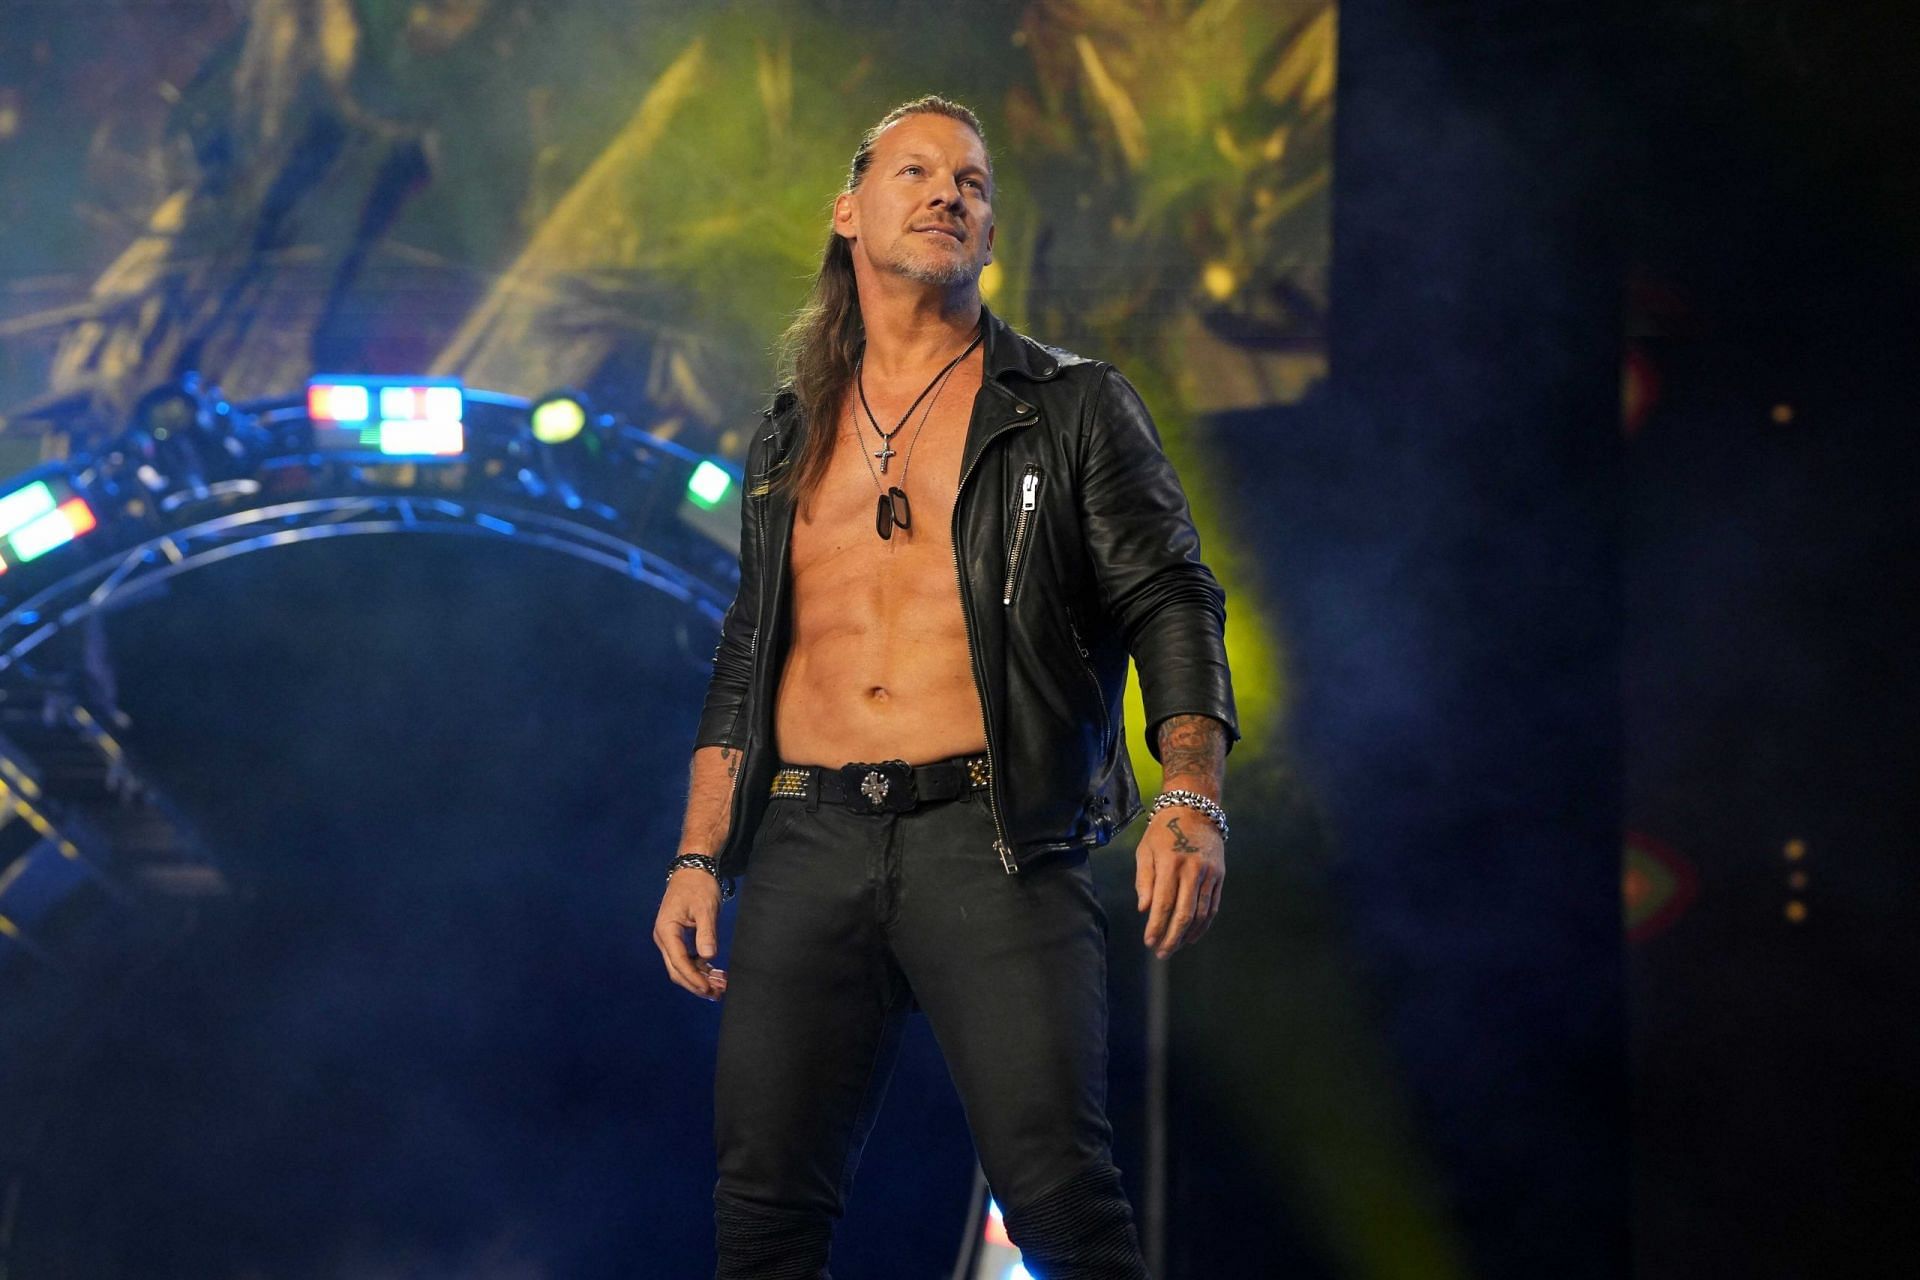 Jericho has been an integral part of both WWE and AEW.